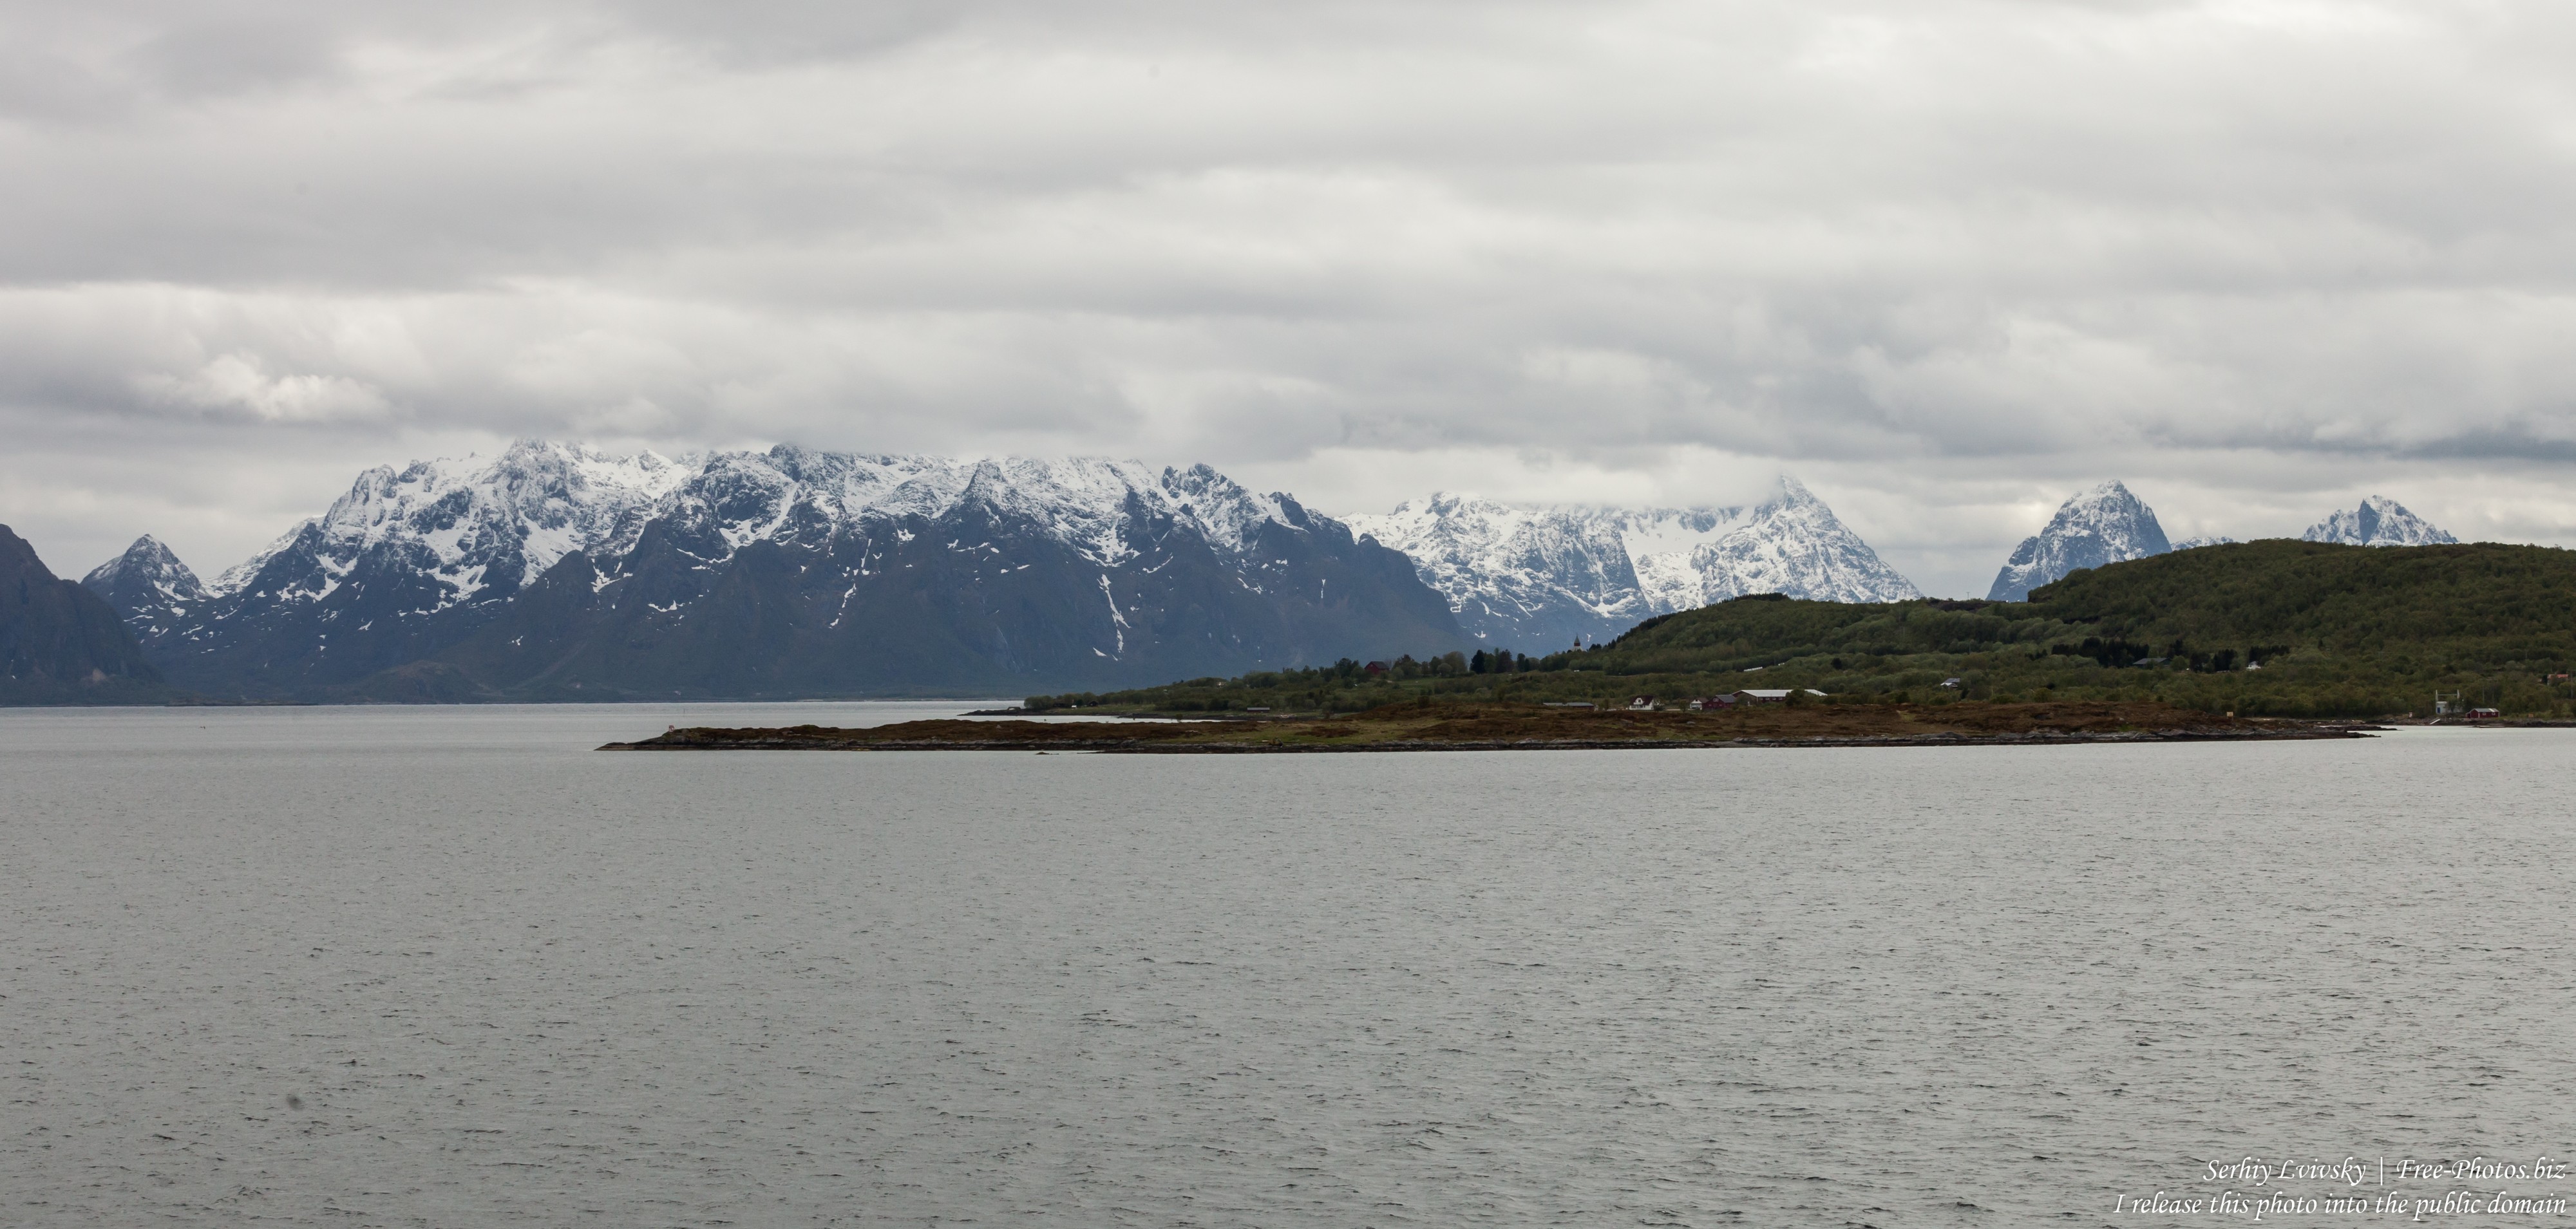 way from Sortland to Stokmarknes, Norway, photographed in June 2018 by Serhiy Lvivsky, picture 11